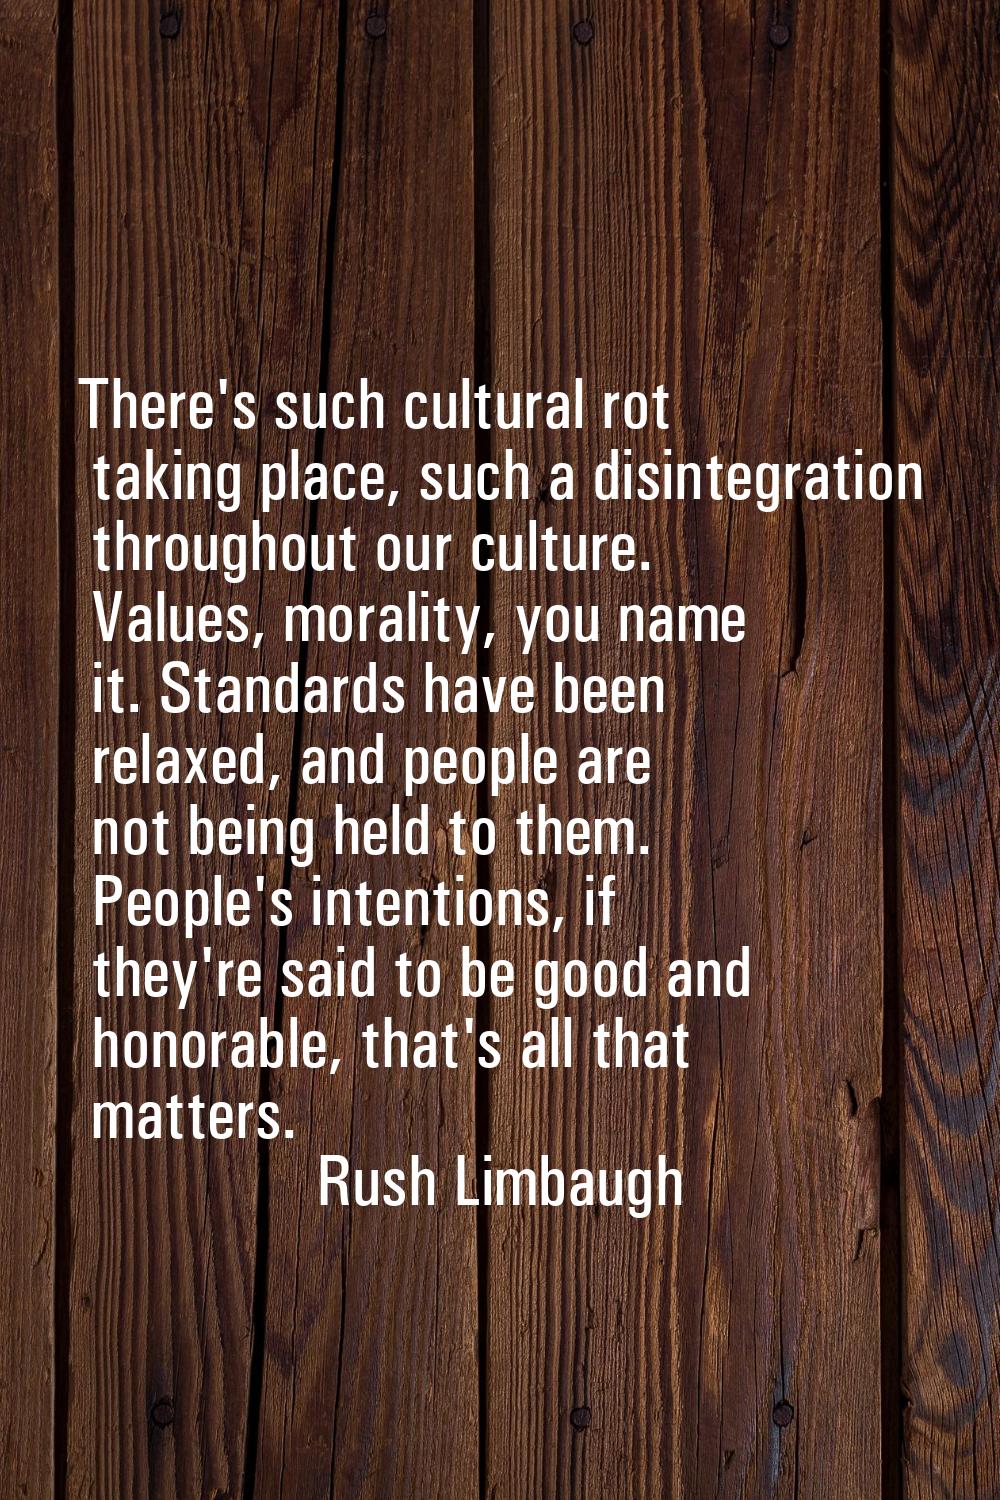 There's such cultural rot taking place, such a disintegration throughout our culture. Values, moral